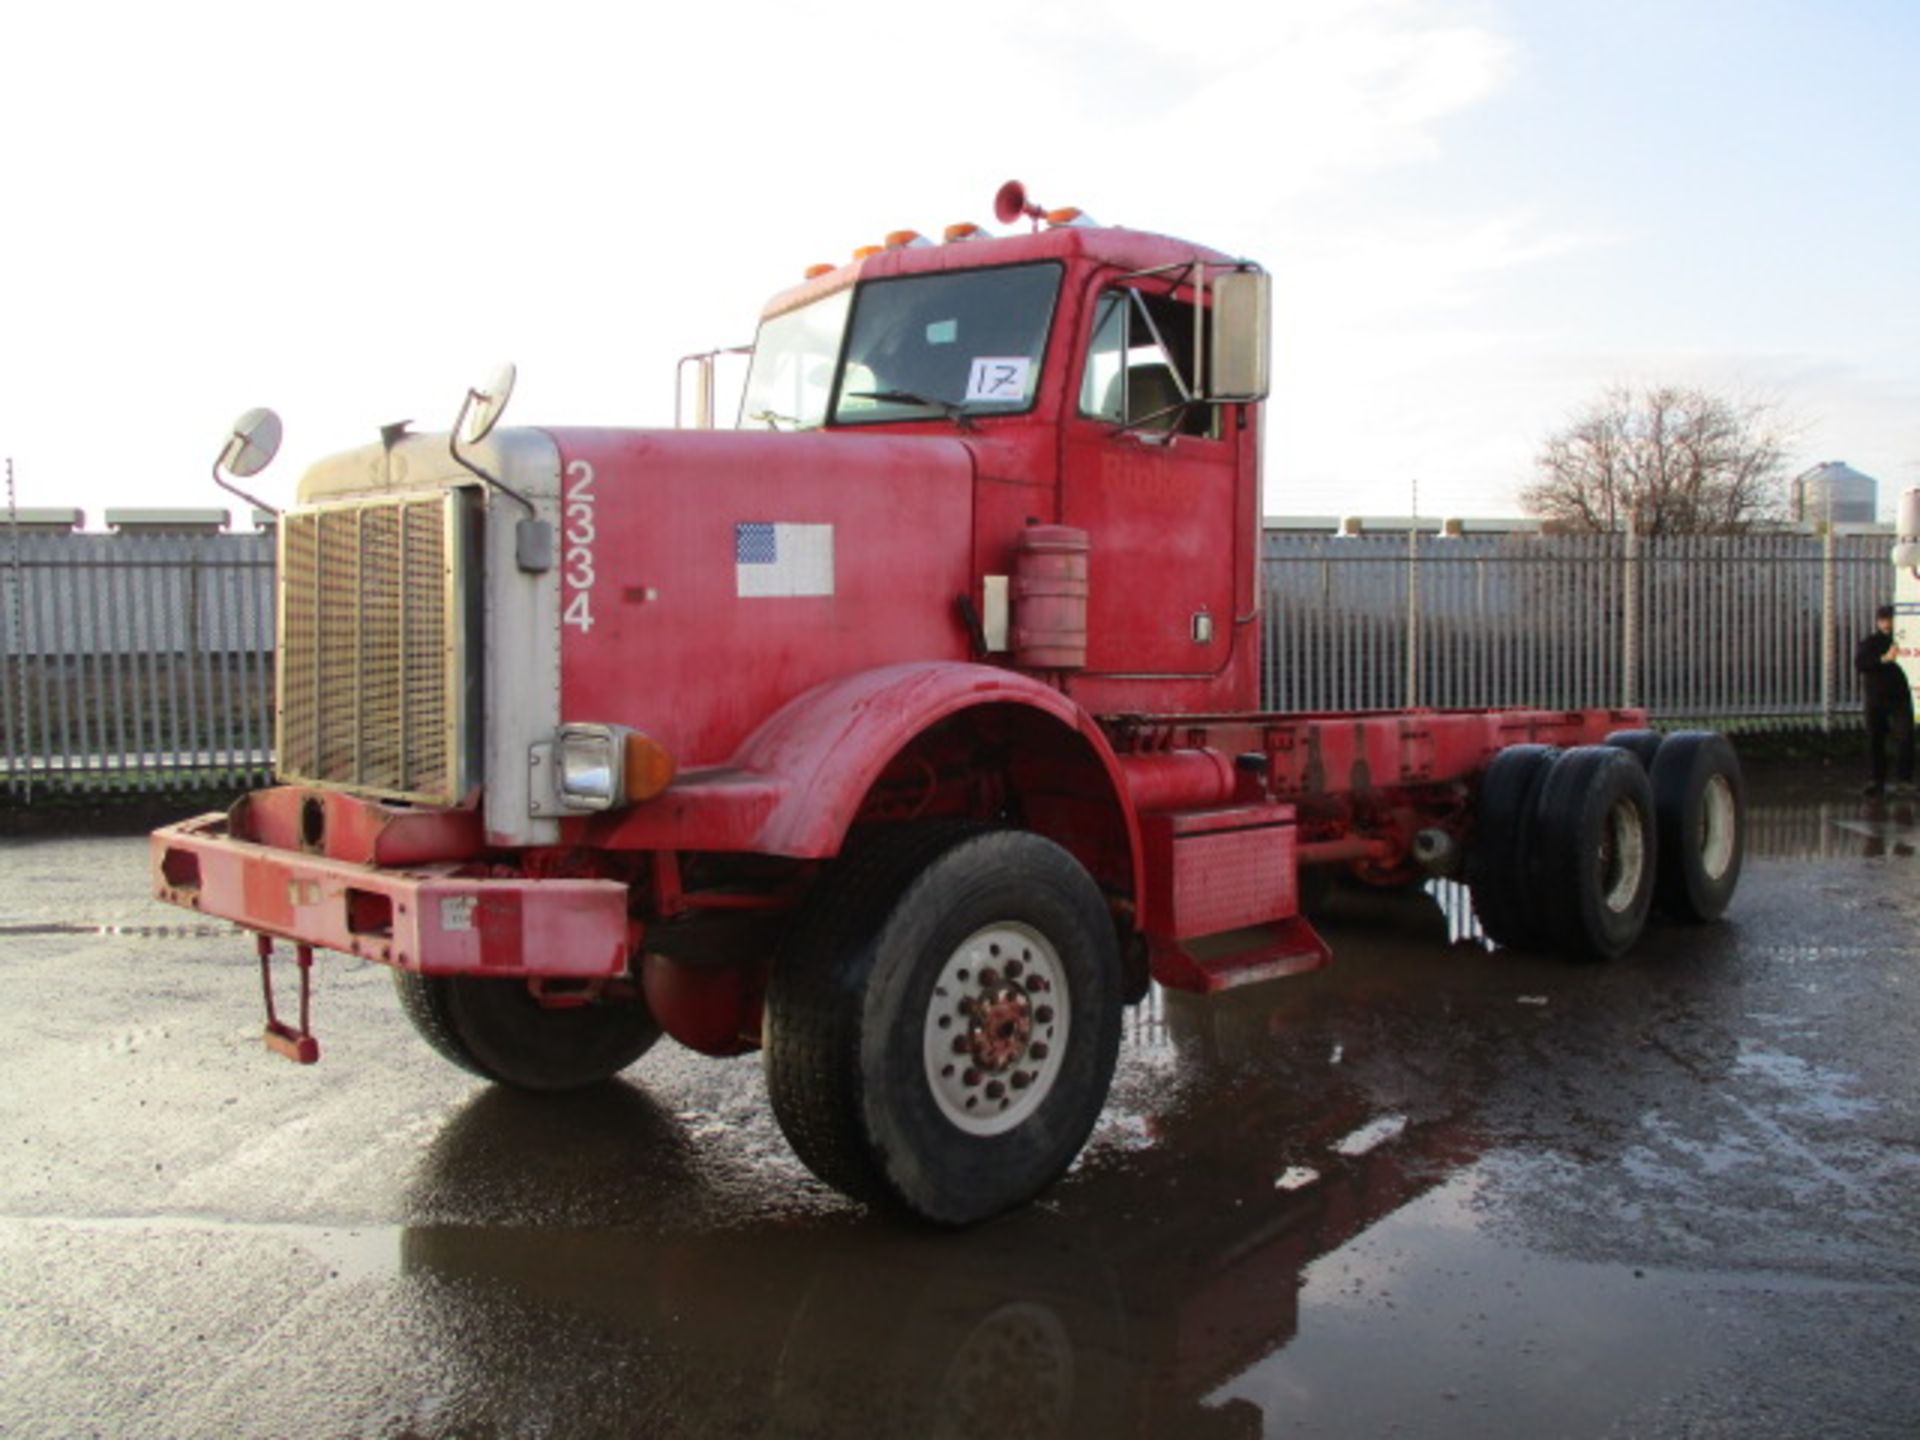 PETERBILT 357 Day Cab Diesel - VIN: 1XPAMA0X6TN409329 - Year: 1996 - 202,962 miles - 6x6 Chassis